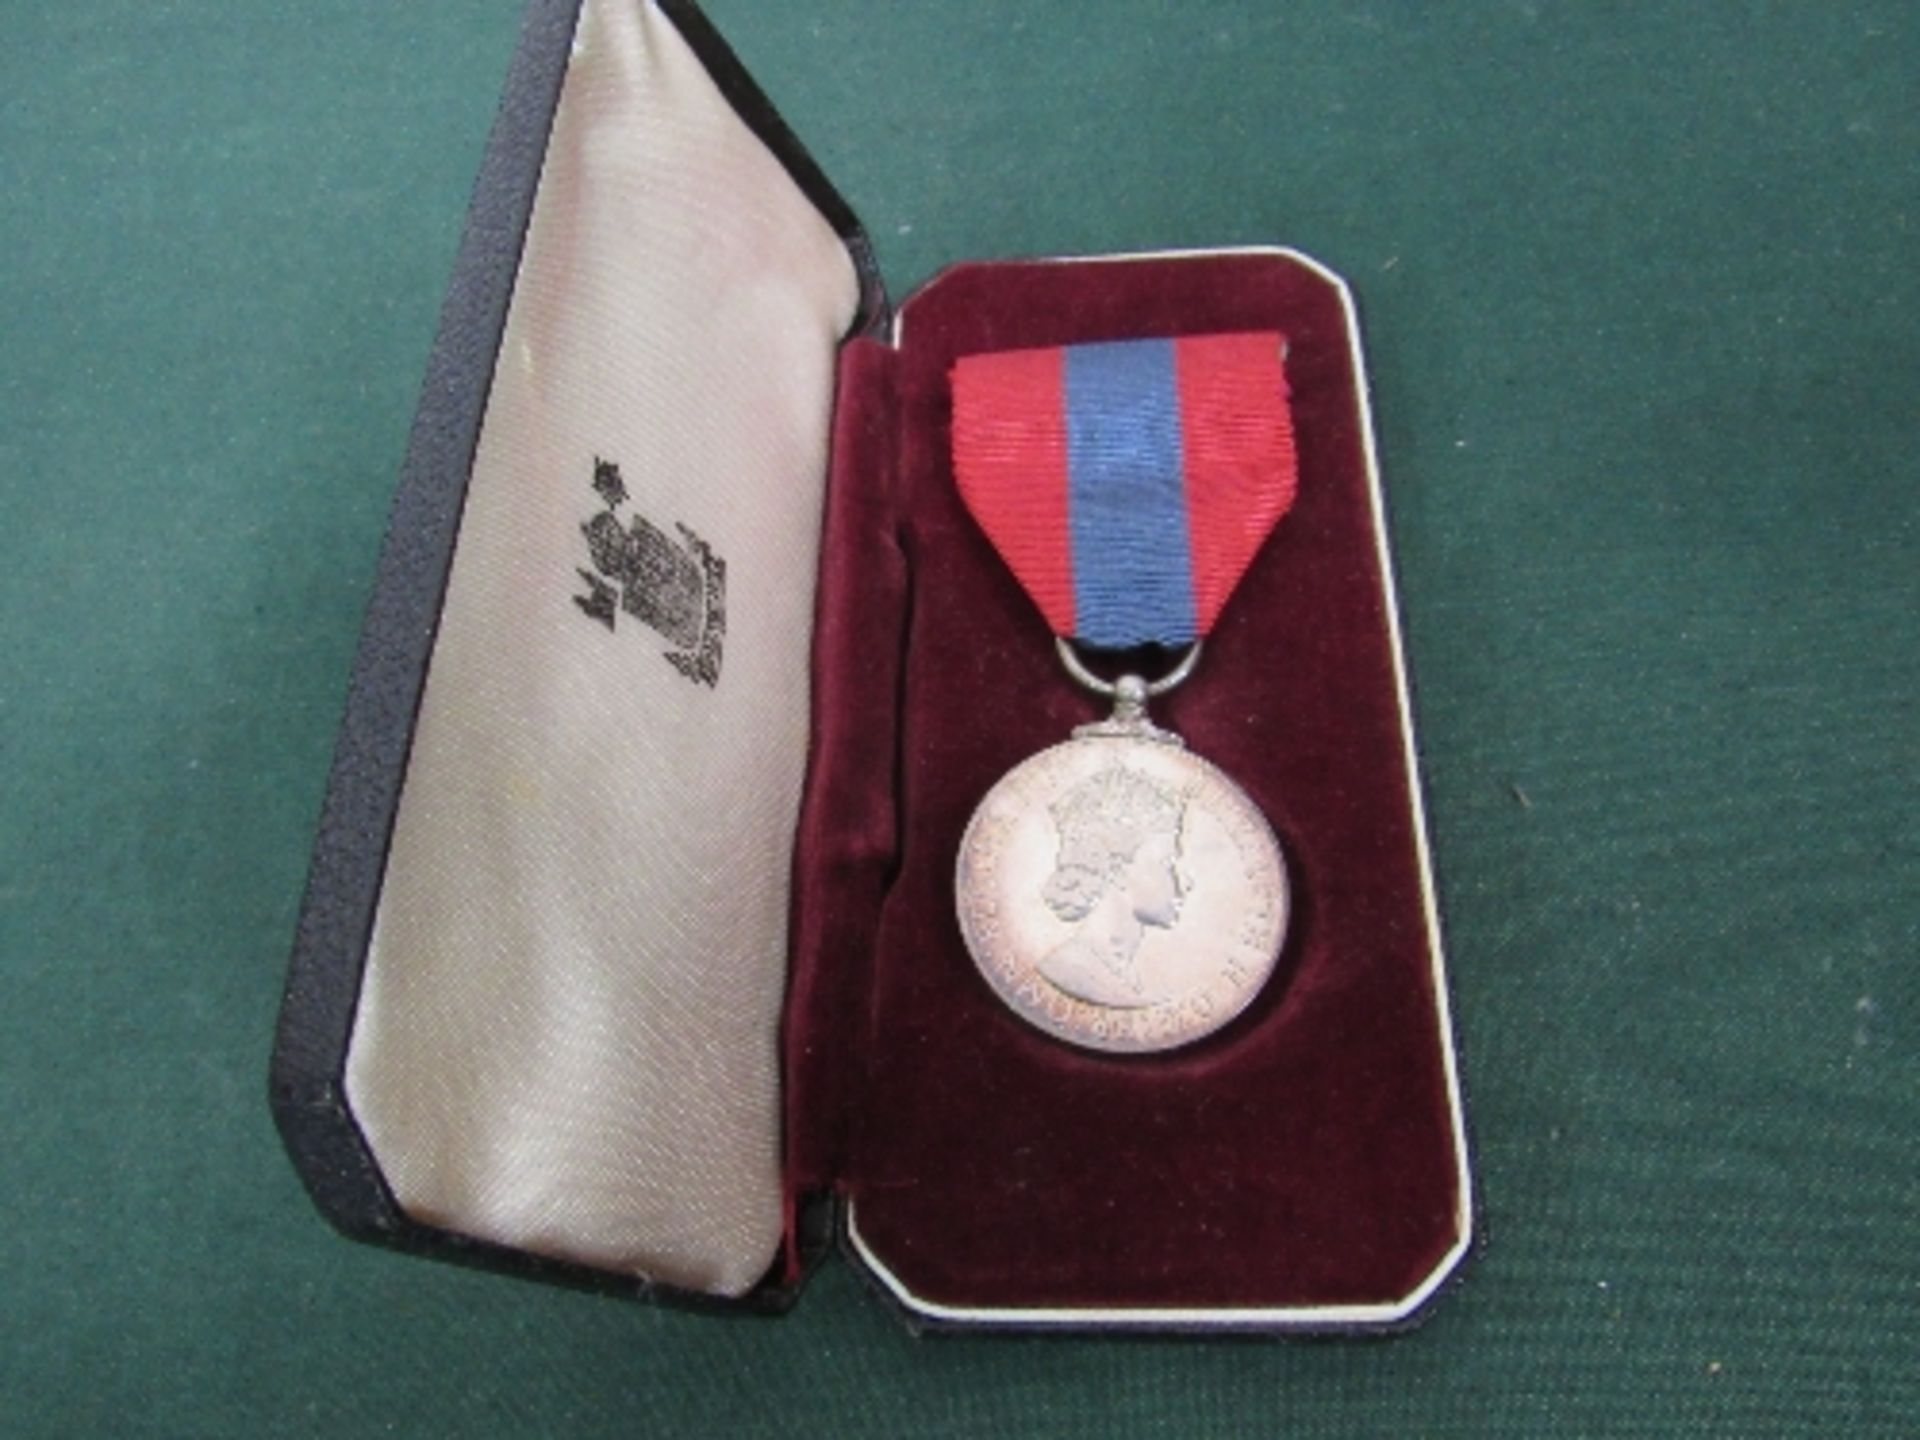 QE2 Imperial Service Medal awarded to Kathleen A M Bedford, in its presentation box with ribbon & - Image 2 of 2